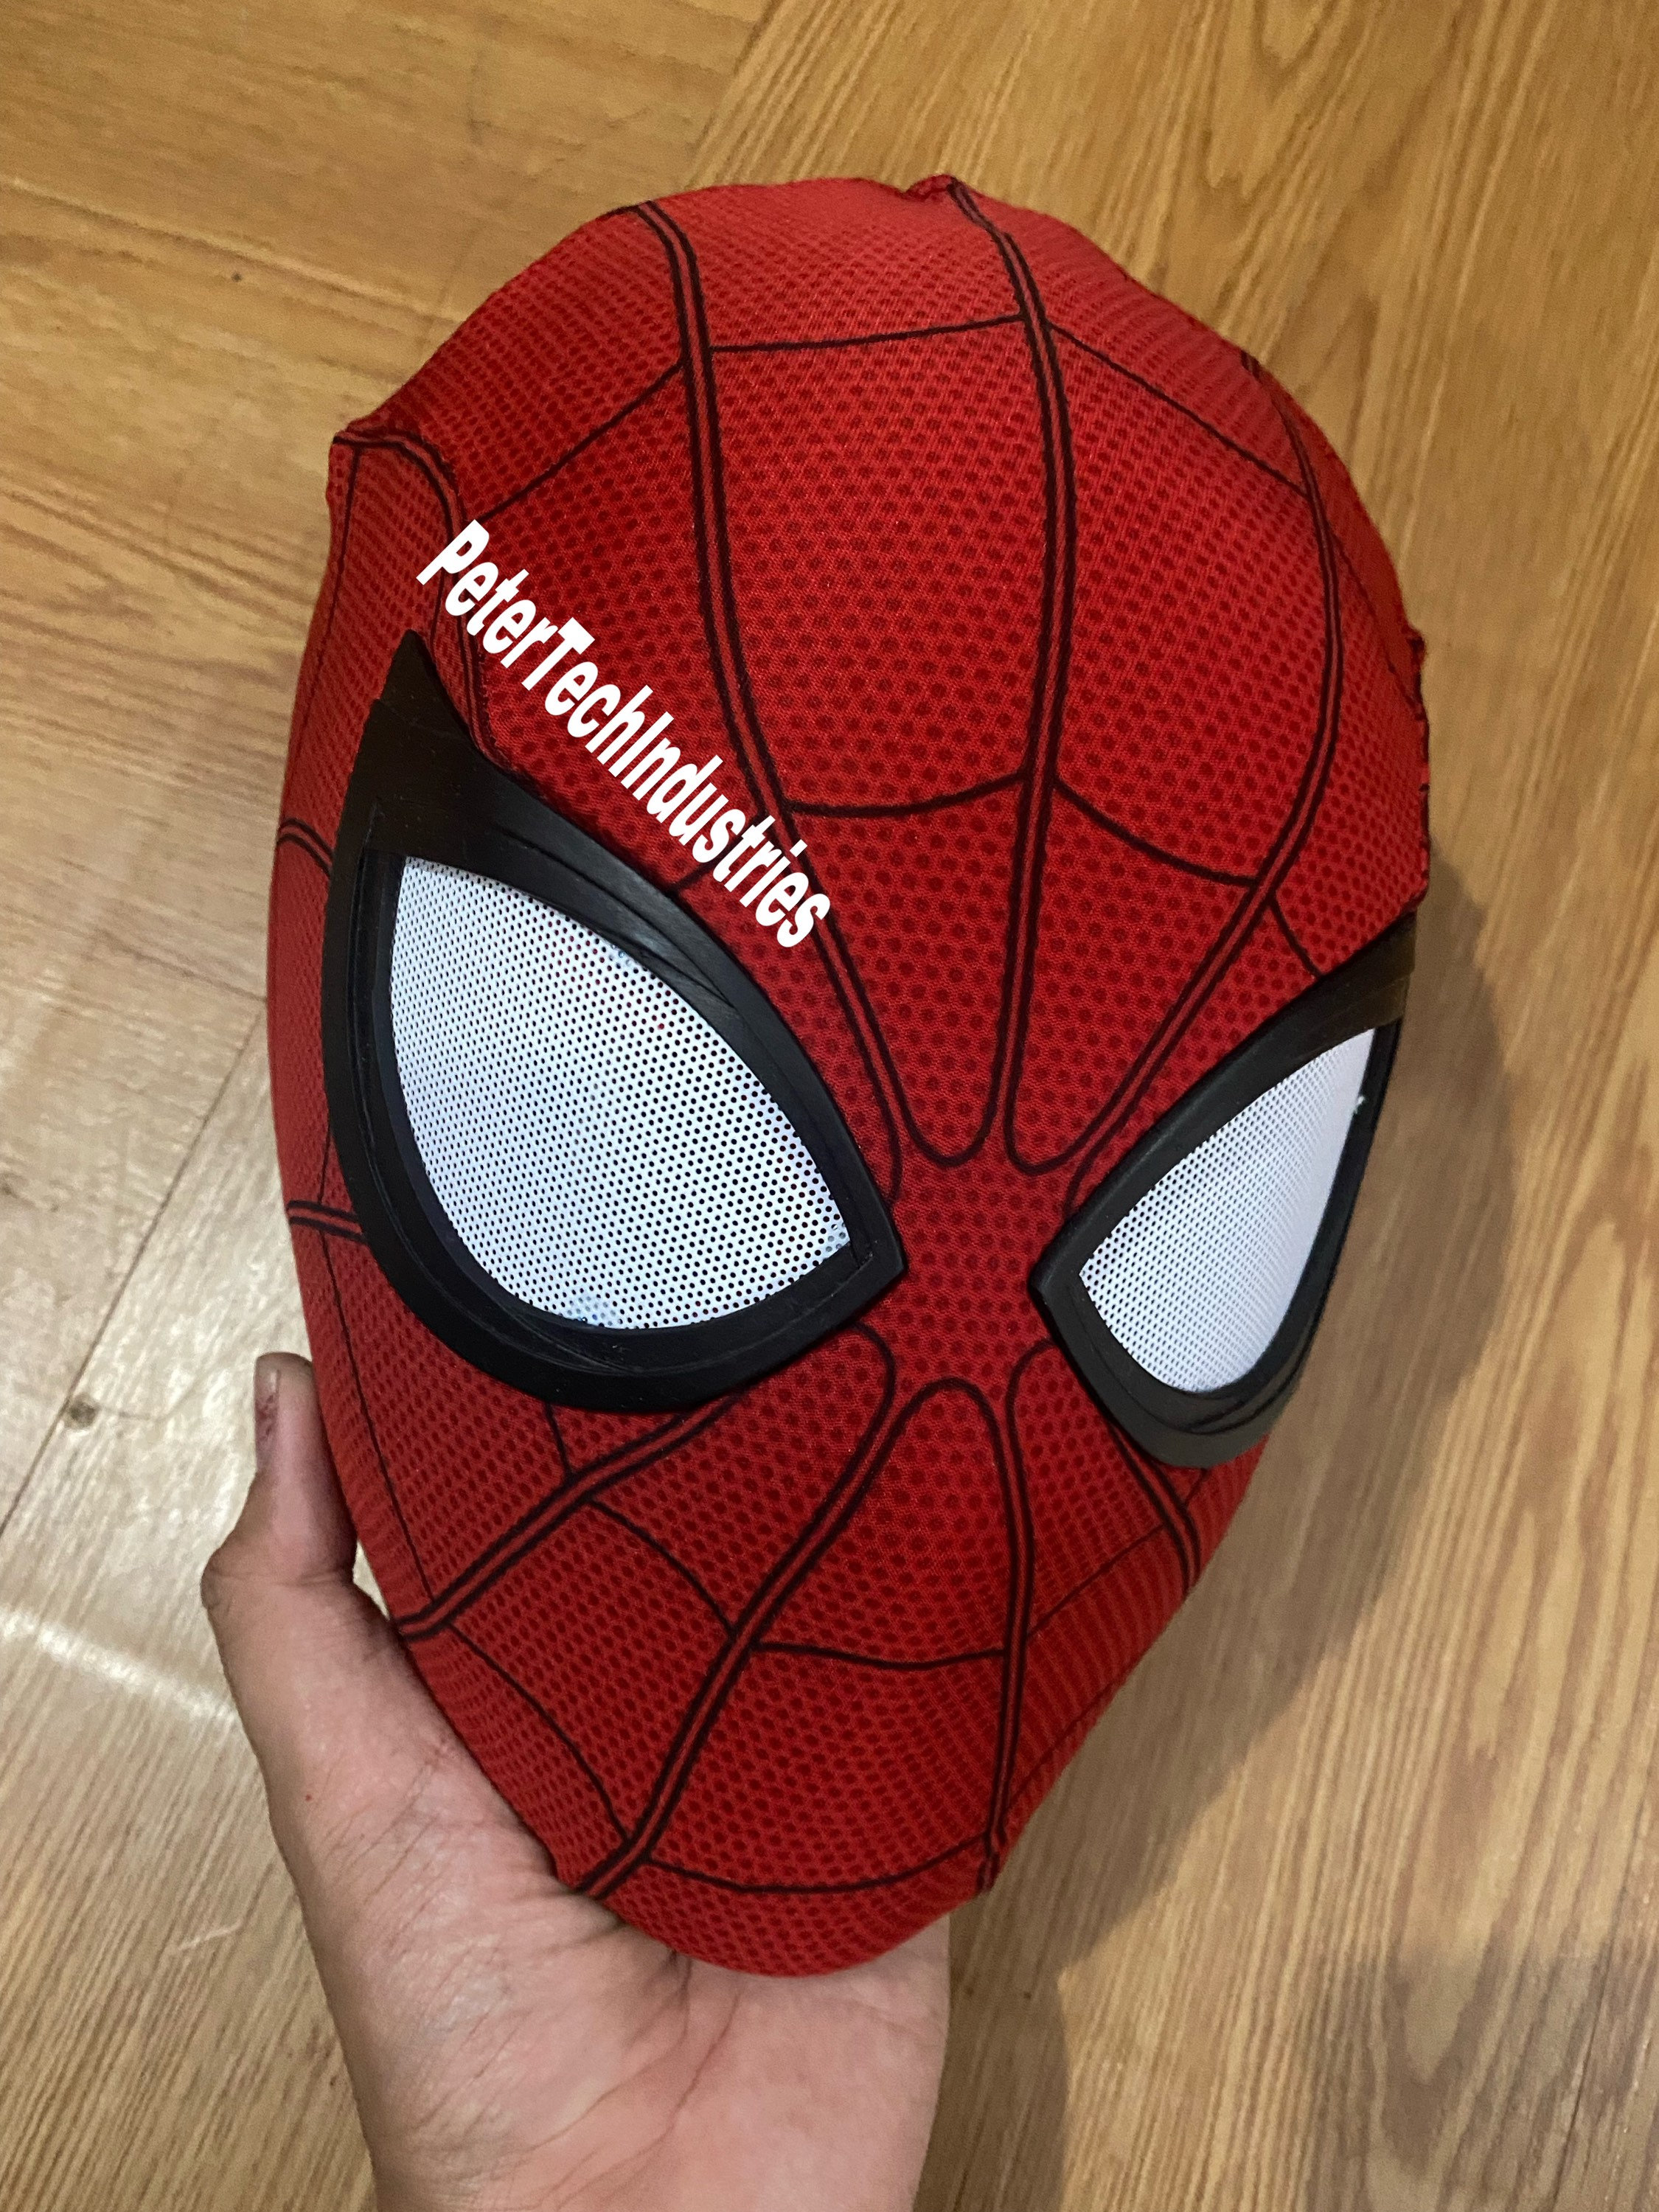 Mcu Spiderman Far From Home Faceshell Mask Spiderman - Etsy Sweden